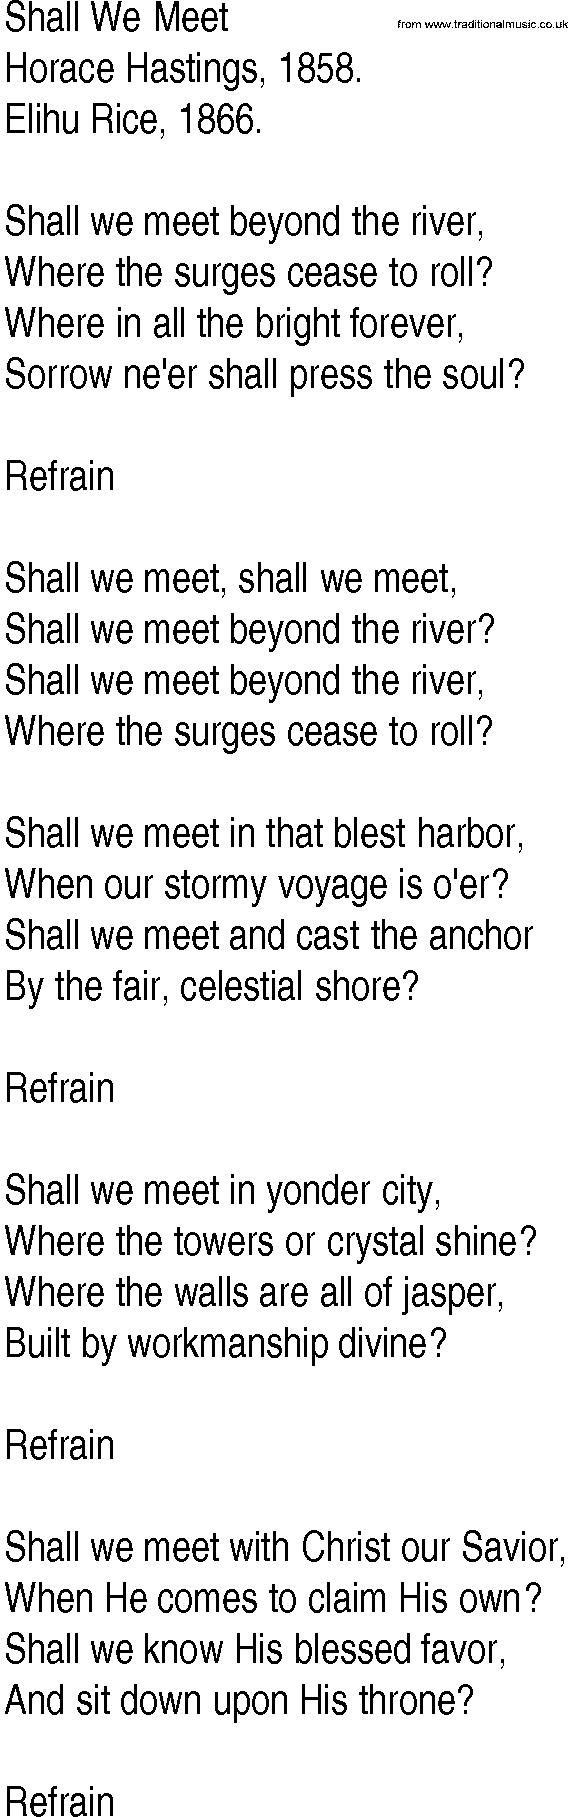 Hymn and Gospel Song: Shall We Meet by Horace Hastings lyrics